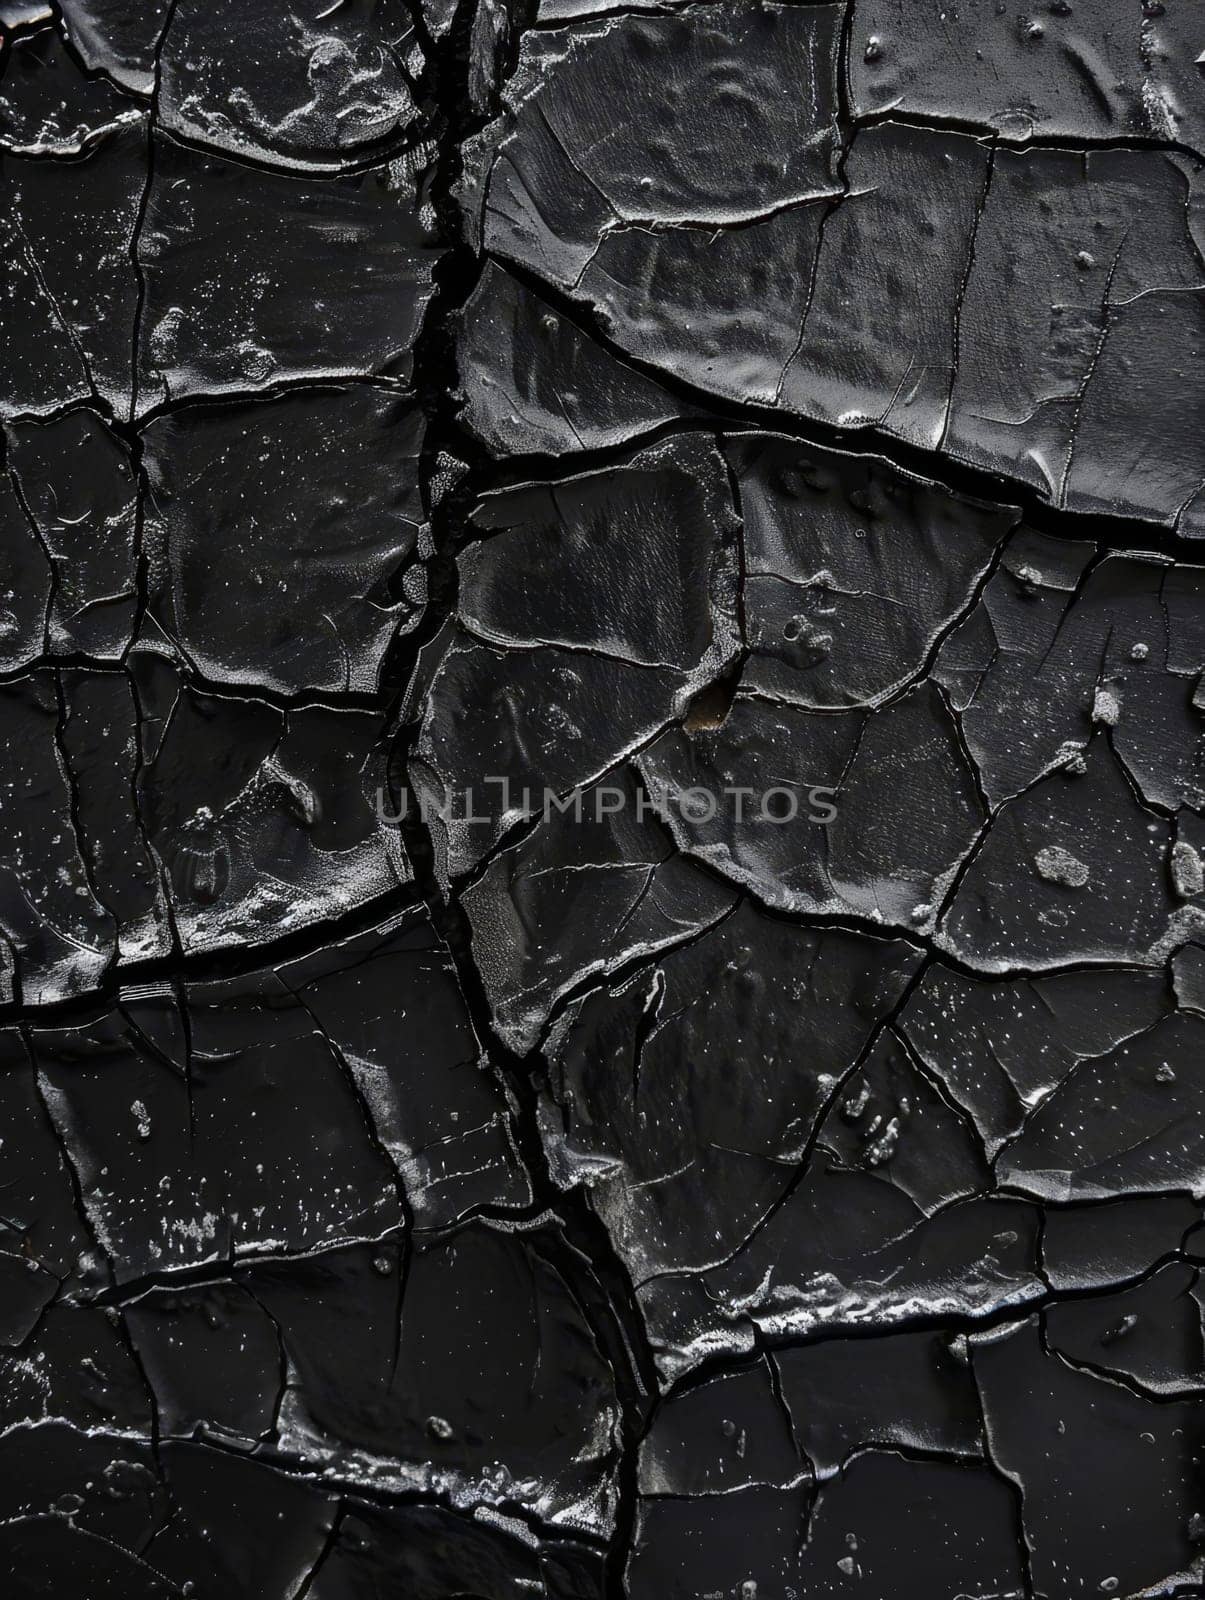 A black surface reveals a detailed cracked paint texture, evoking a sense of historical wear and tear. The visual narrative speaks to the passage of time